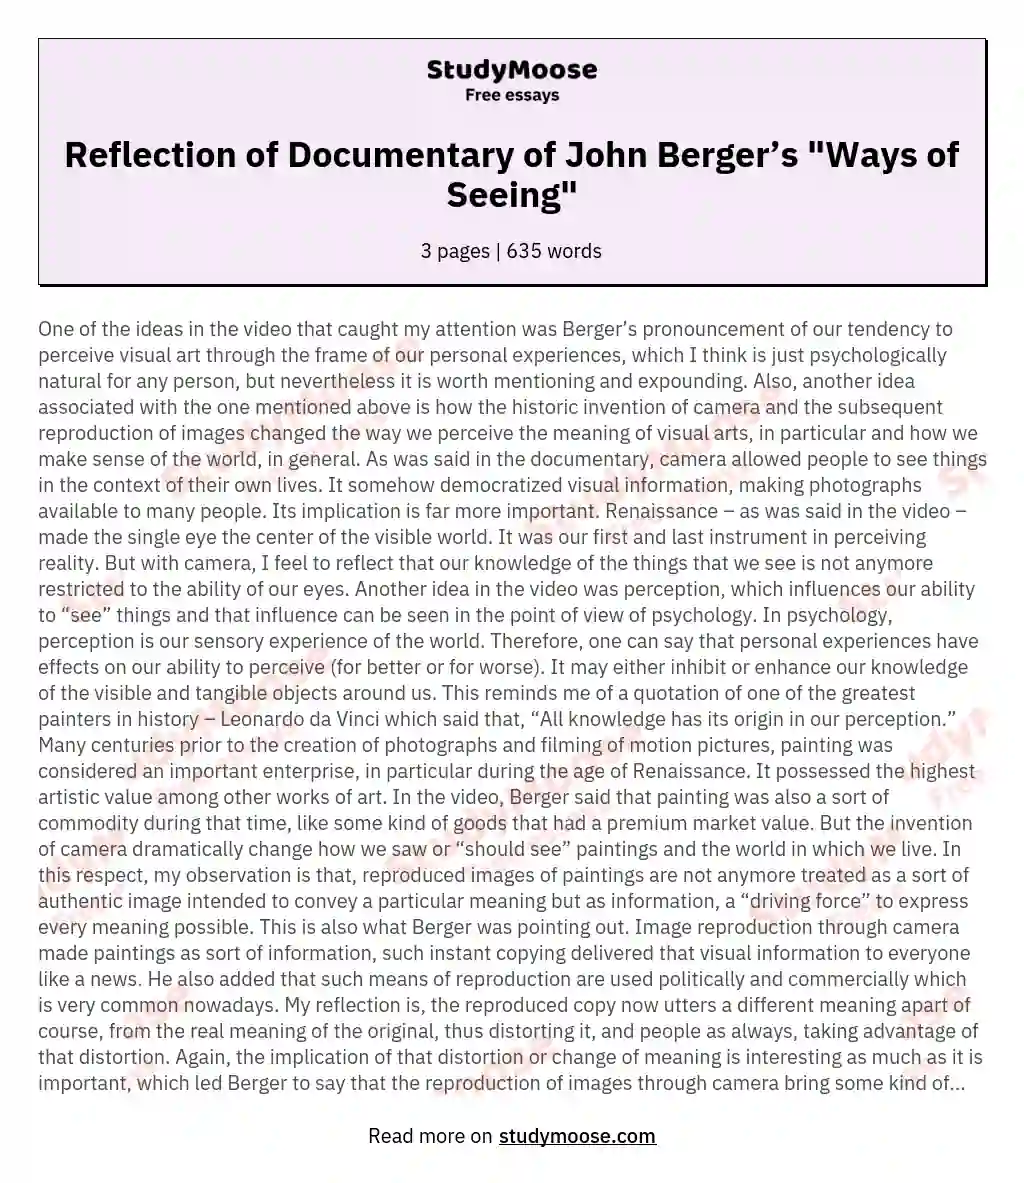 Reflection of Documentary of John Berger’s "Ways of Seeing"